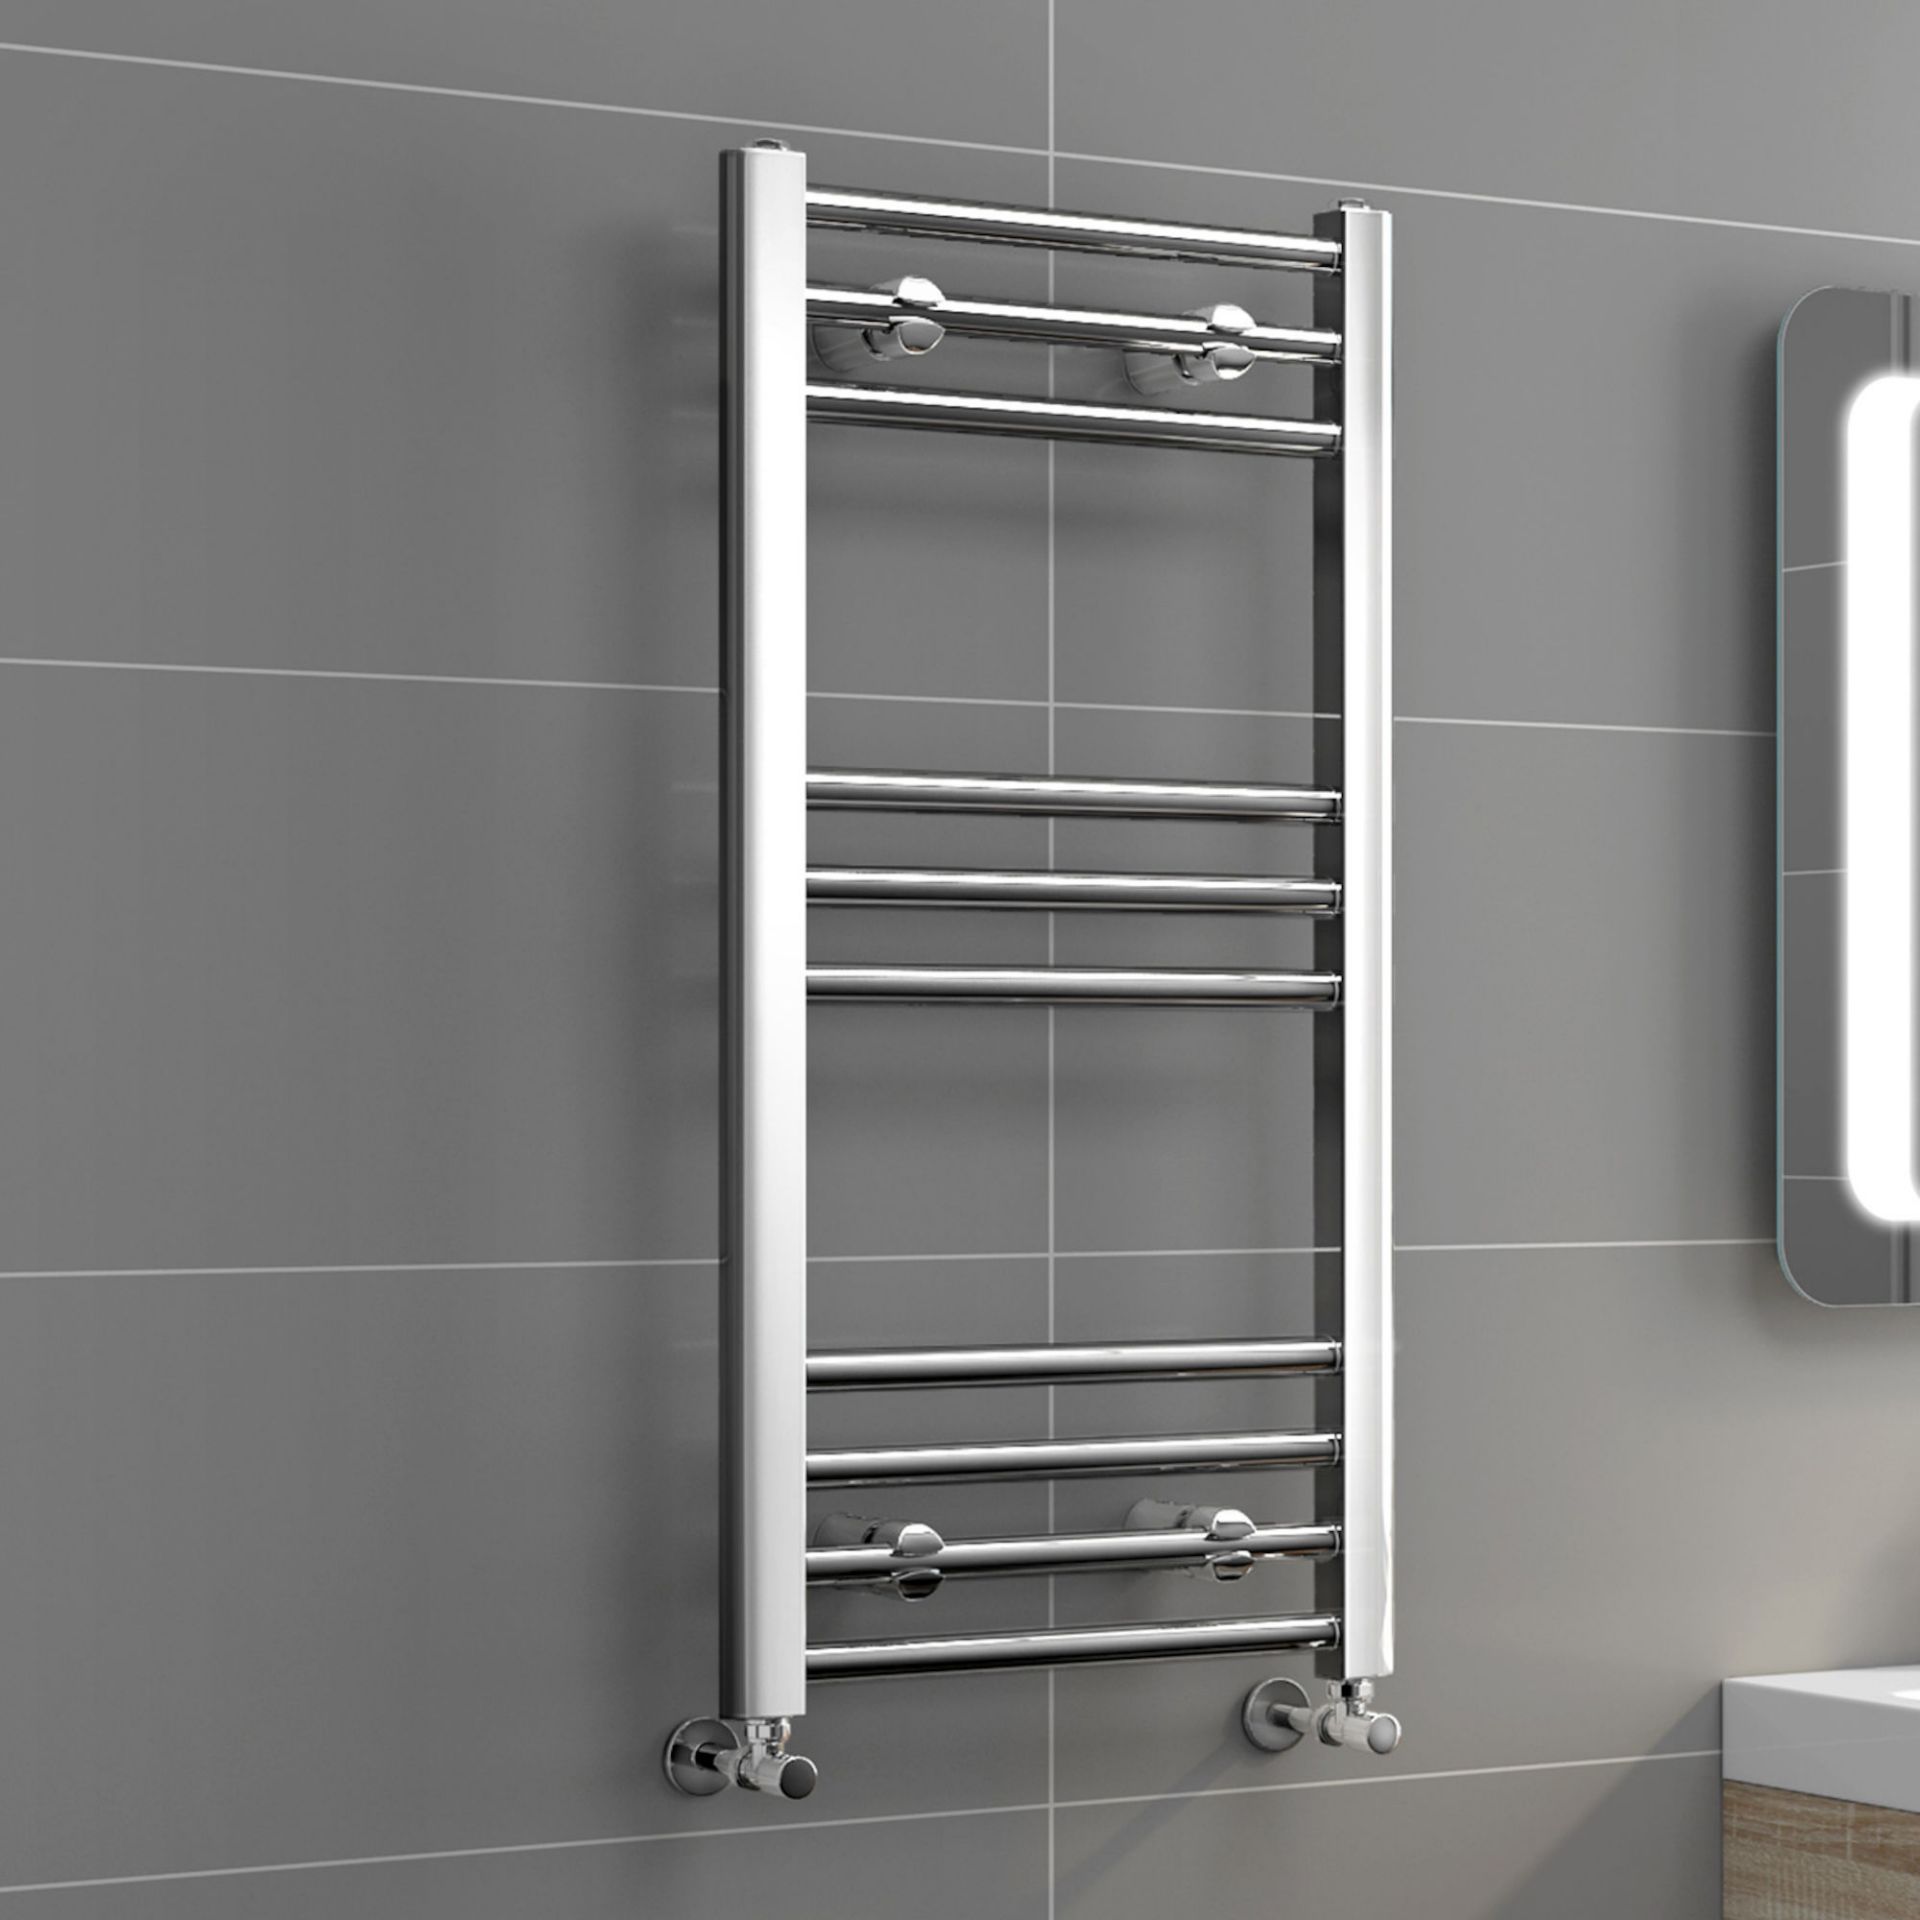 (TY49) 700x400mm - 20mm Tubes - Chrome Heated Straight Rail Ladder Towel Radiator. Low carbon